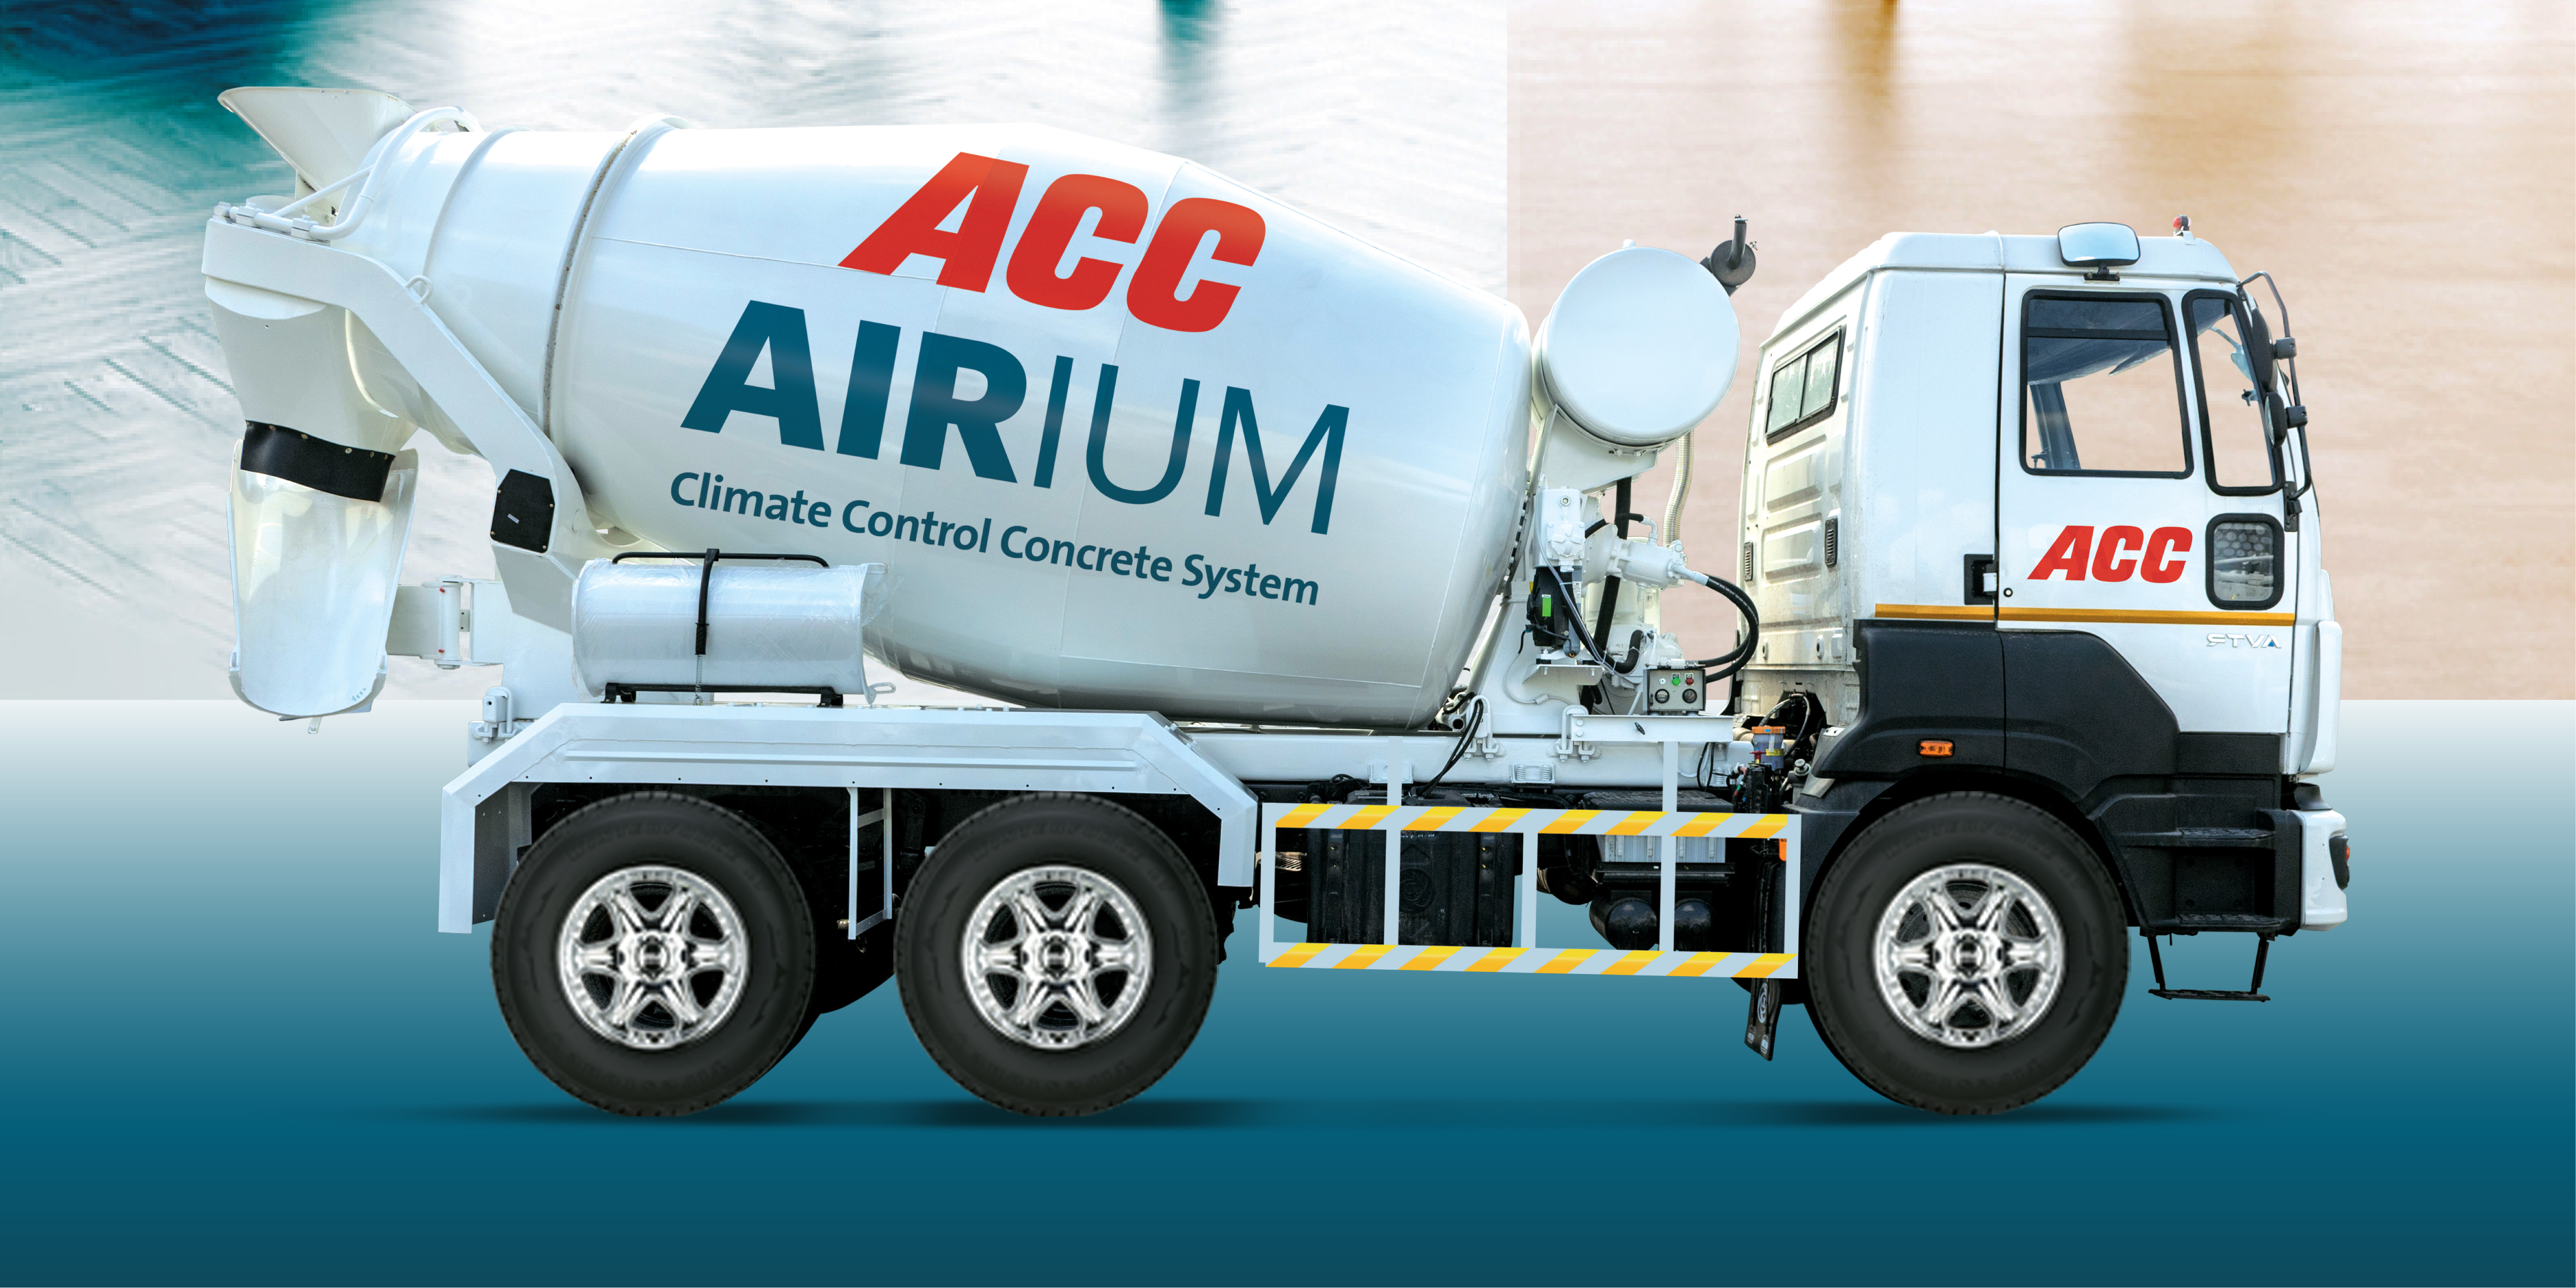 acc-ltd-launches-acc-airium-a-revolutionary-climate-control-concrete-insulation-system-in-india